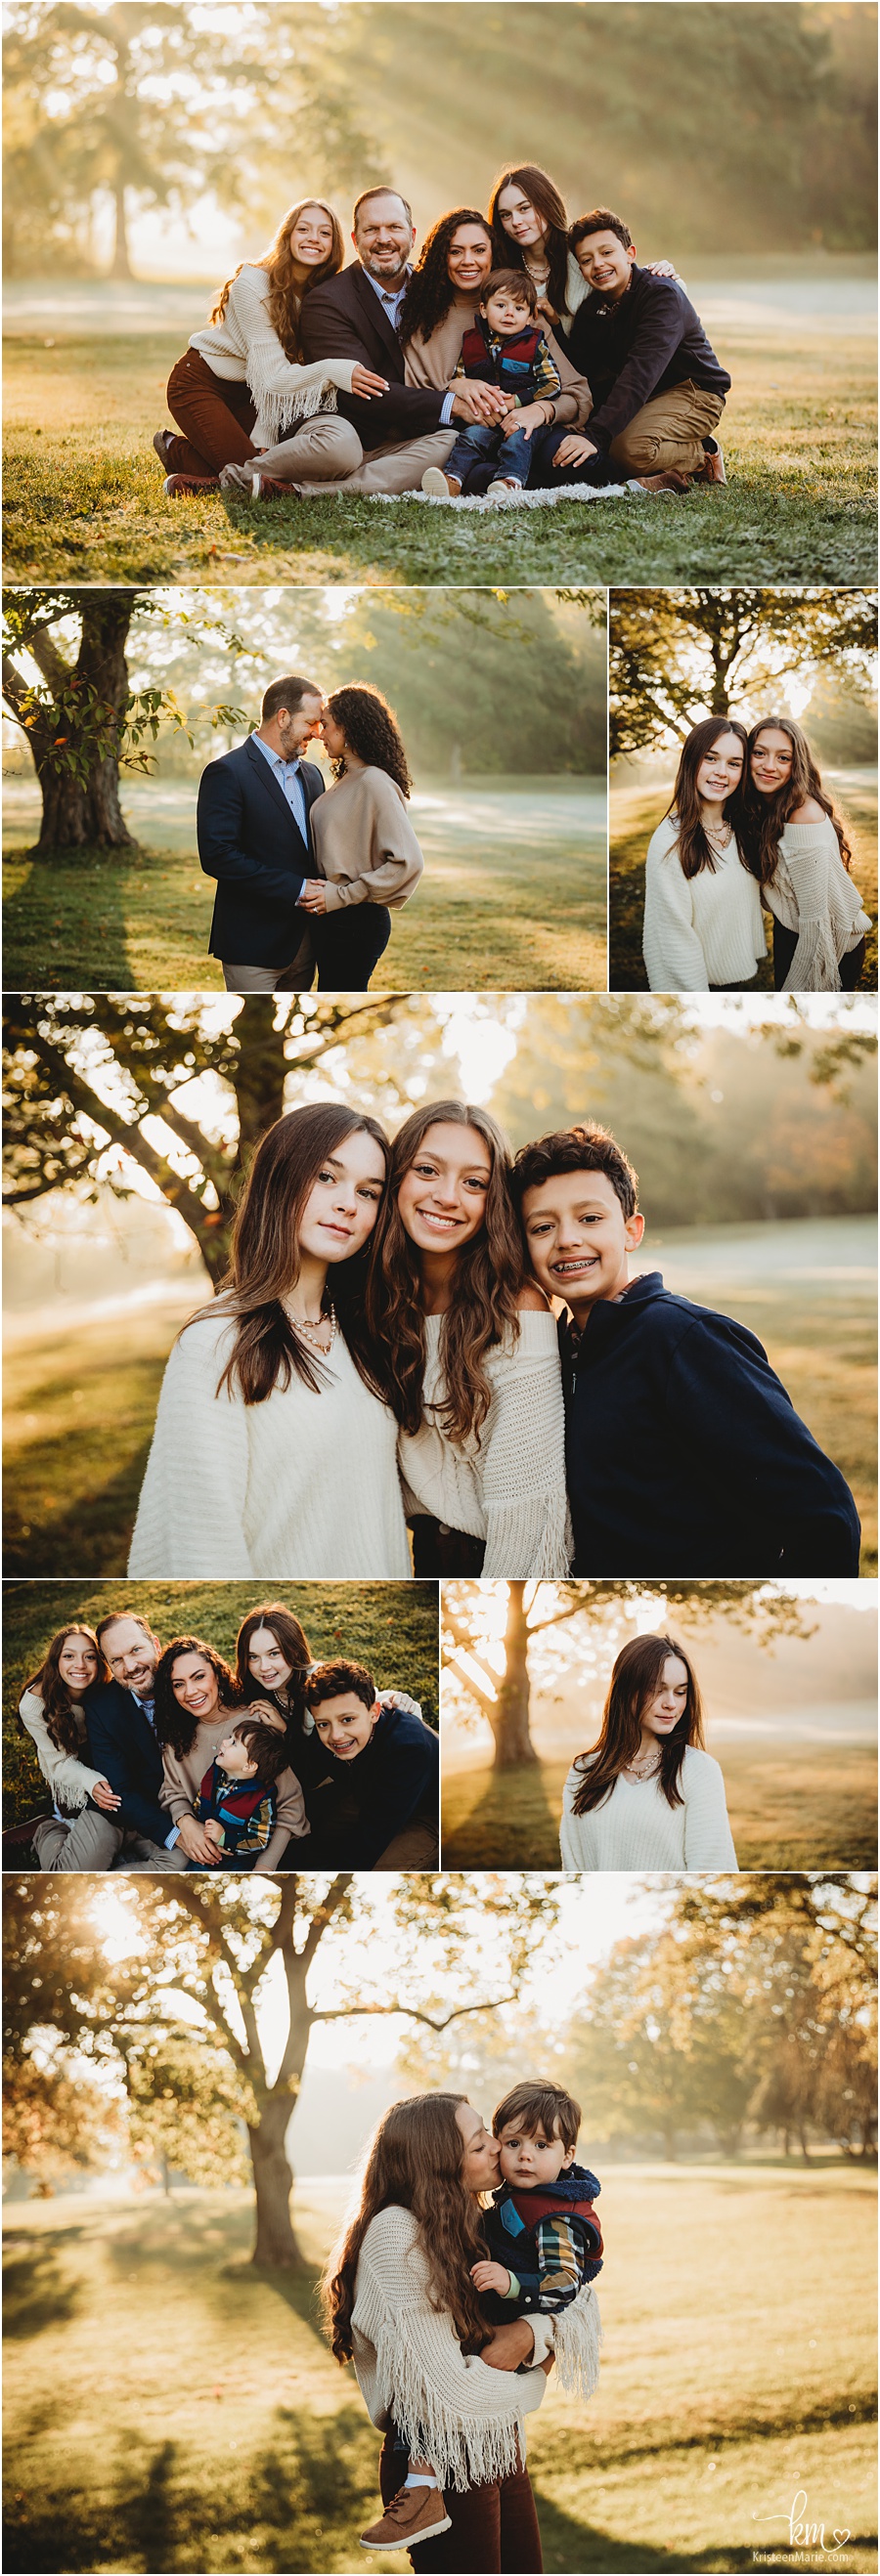 family pictures - sunrise session on foggy monring